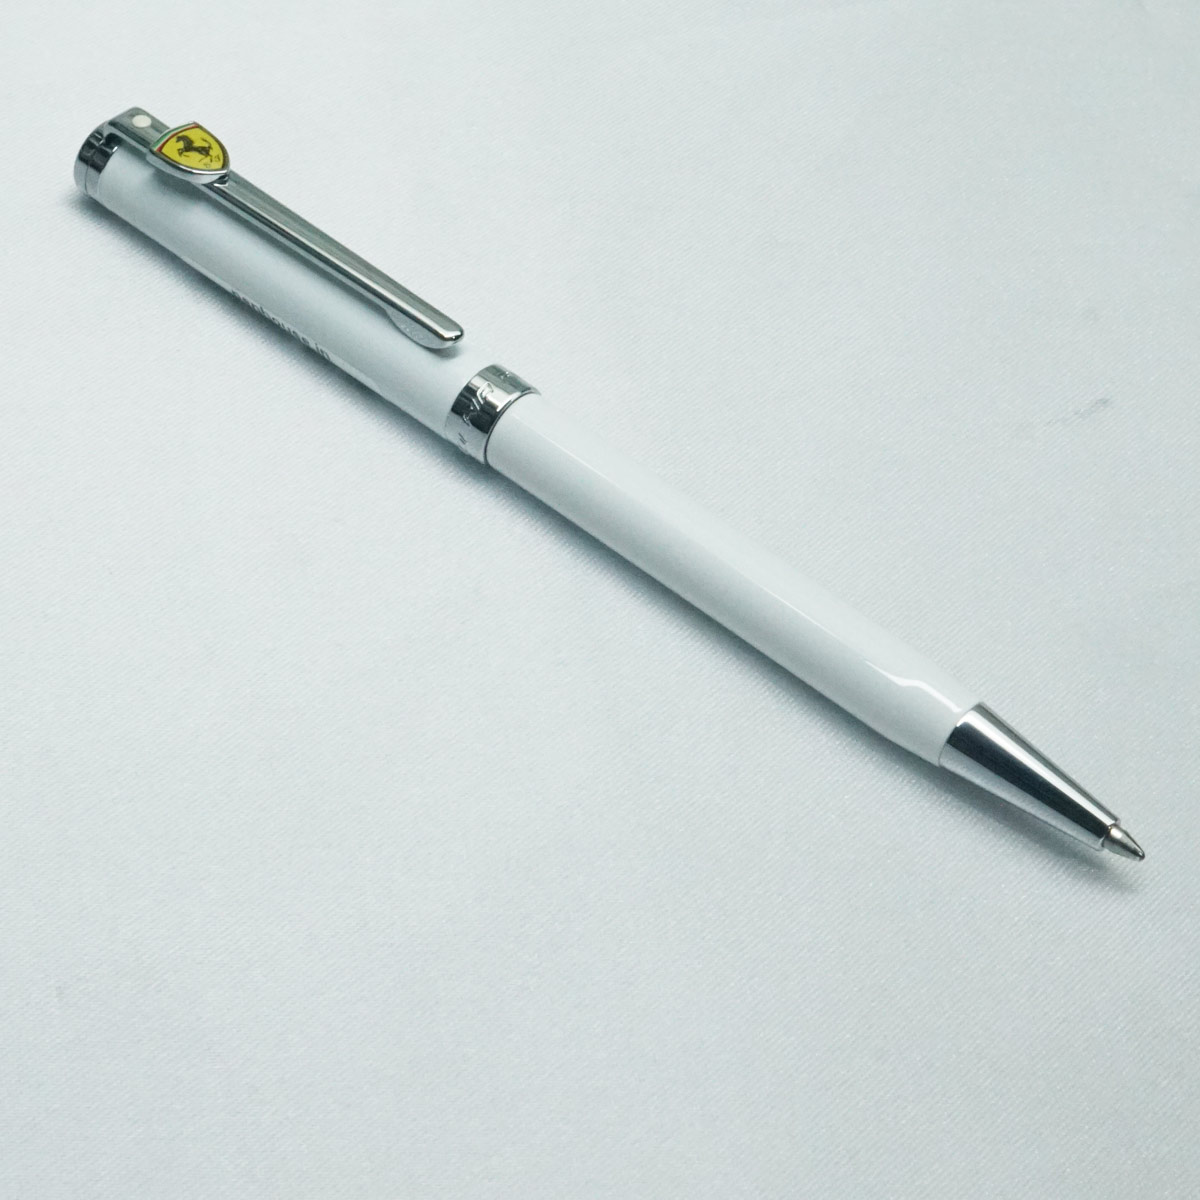 Sheaffer Intensity White color  Body and Cap with Silver Trims Twist Ball Pen with Ferrari Logo on Top SKU 21800